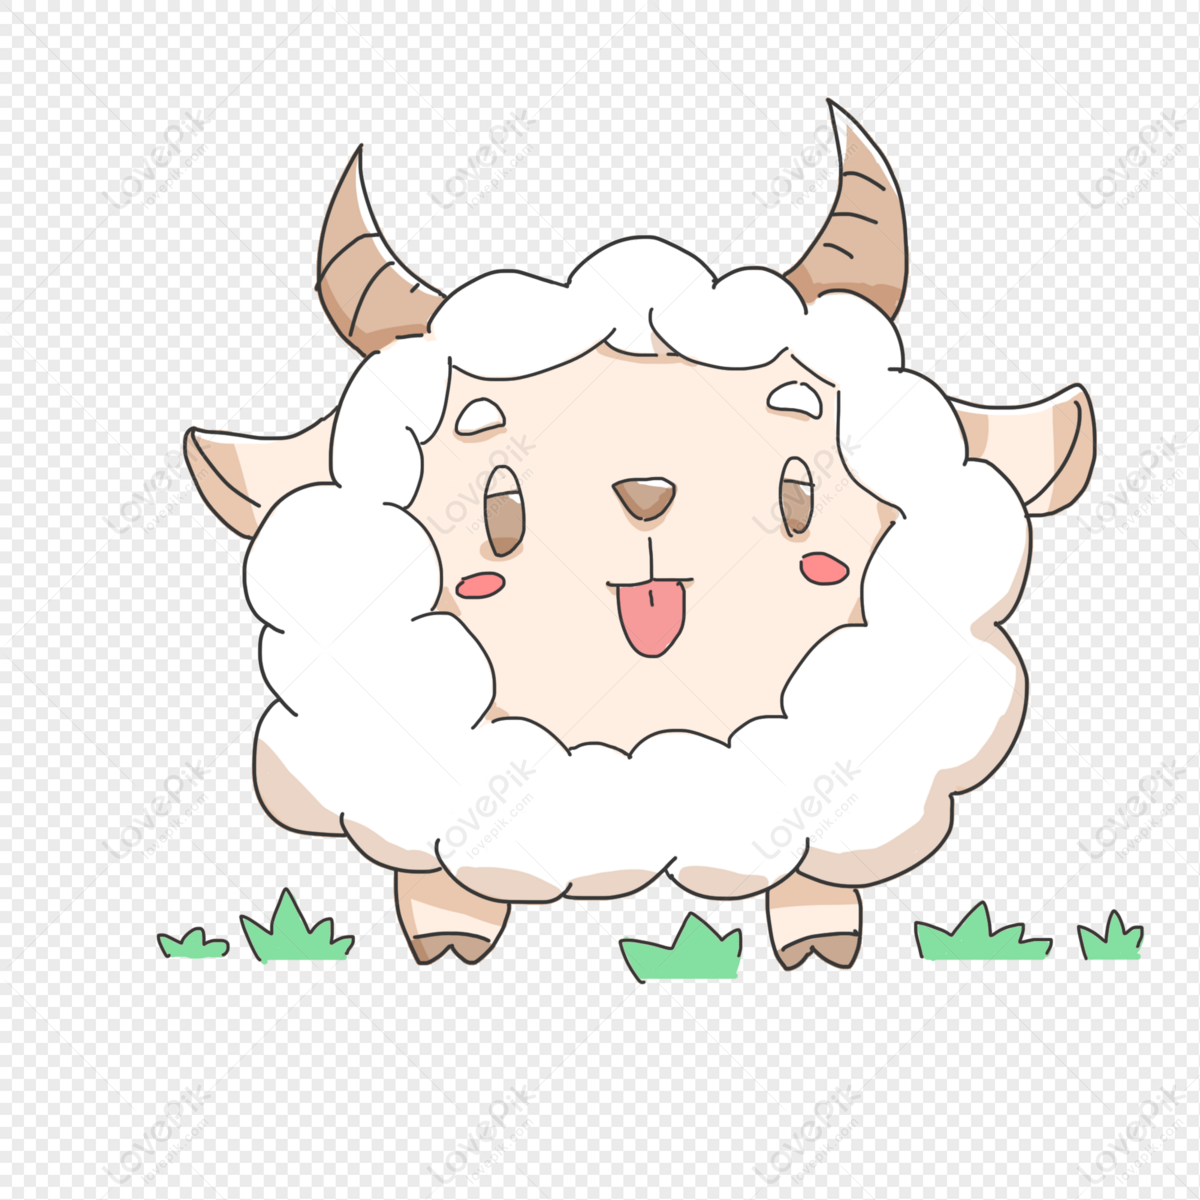 Cute Cartoon Sheep PNG White Transparent And Clipart Image For Free  Download - Lovepik | 401451742